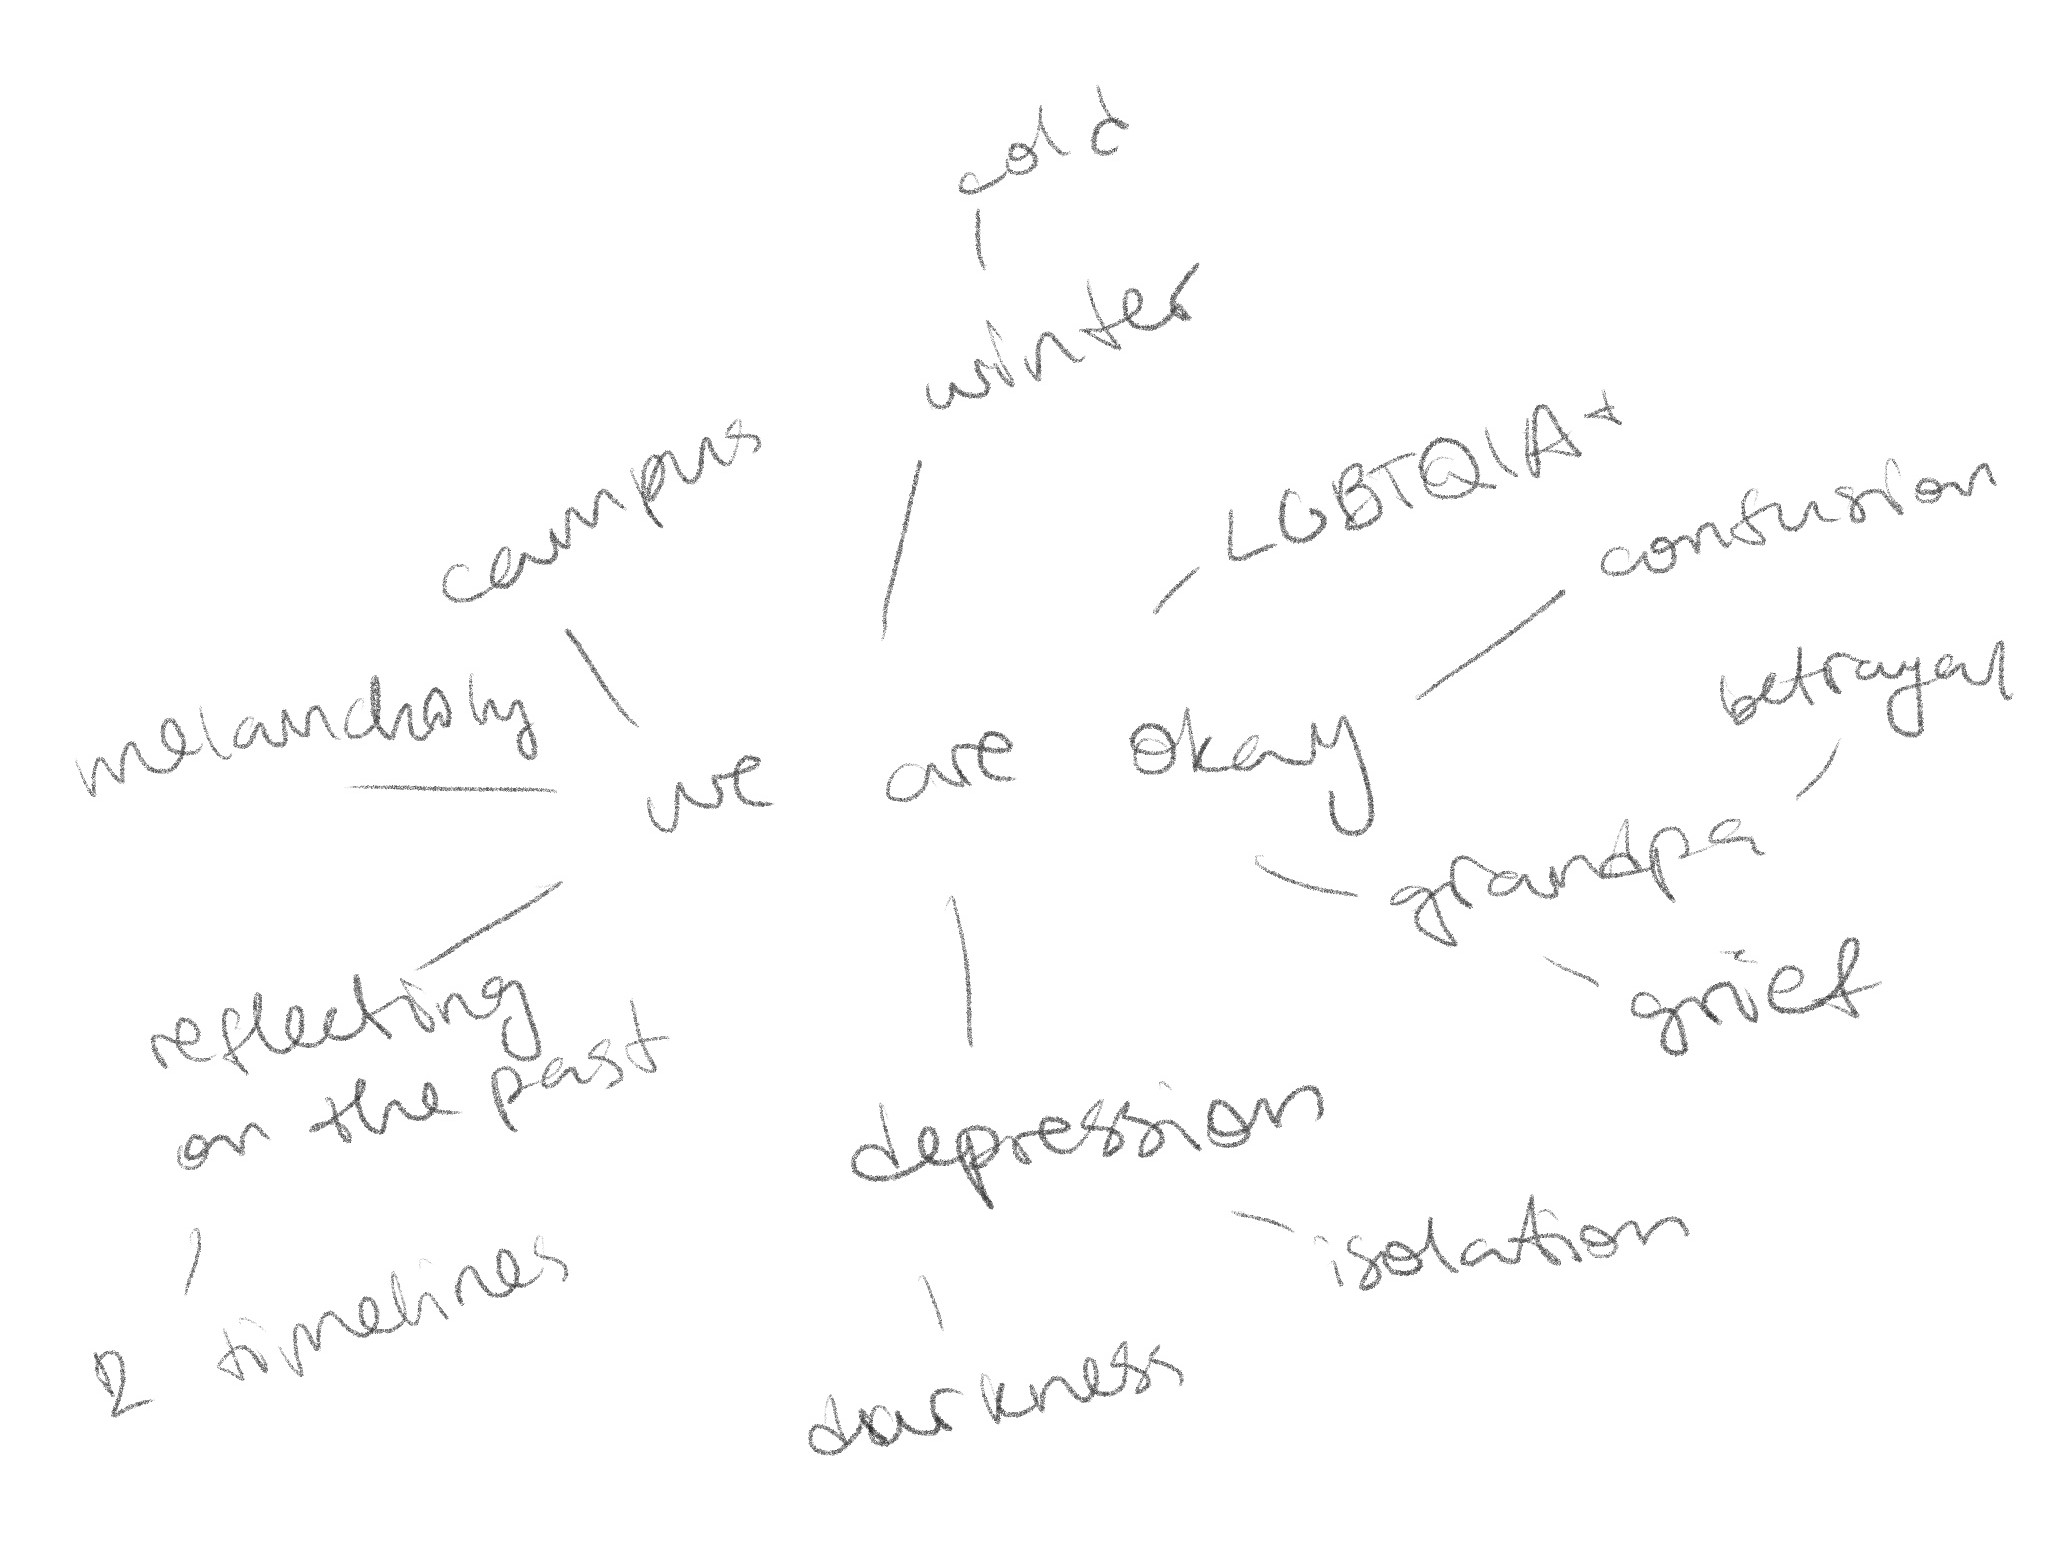 We Are Okay mind map. Features words like 'cold', 'darkness', 'melancholy' 'betrayal', and others.